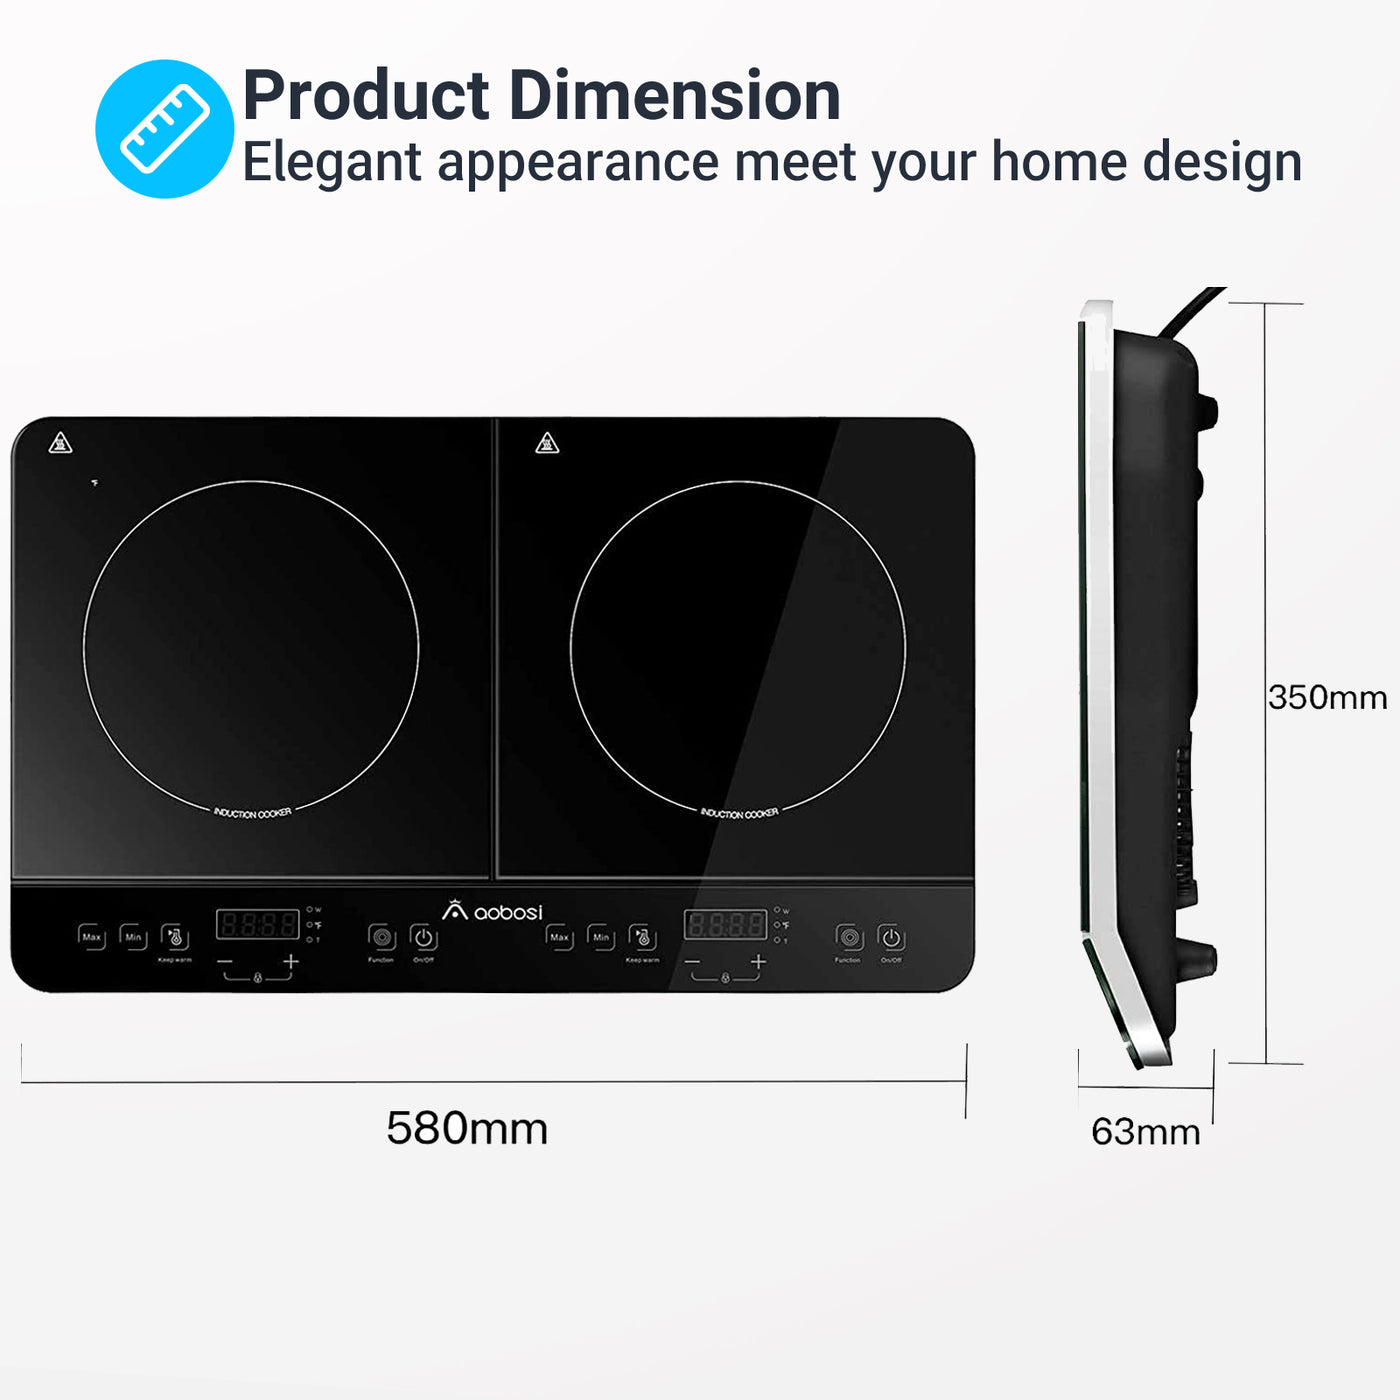 Aaobosi 1800W double induction cooktop dimensions